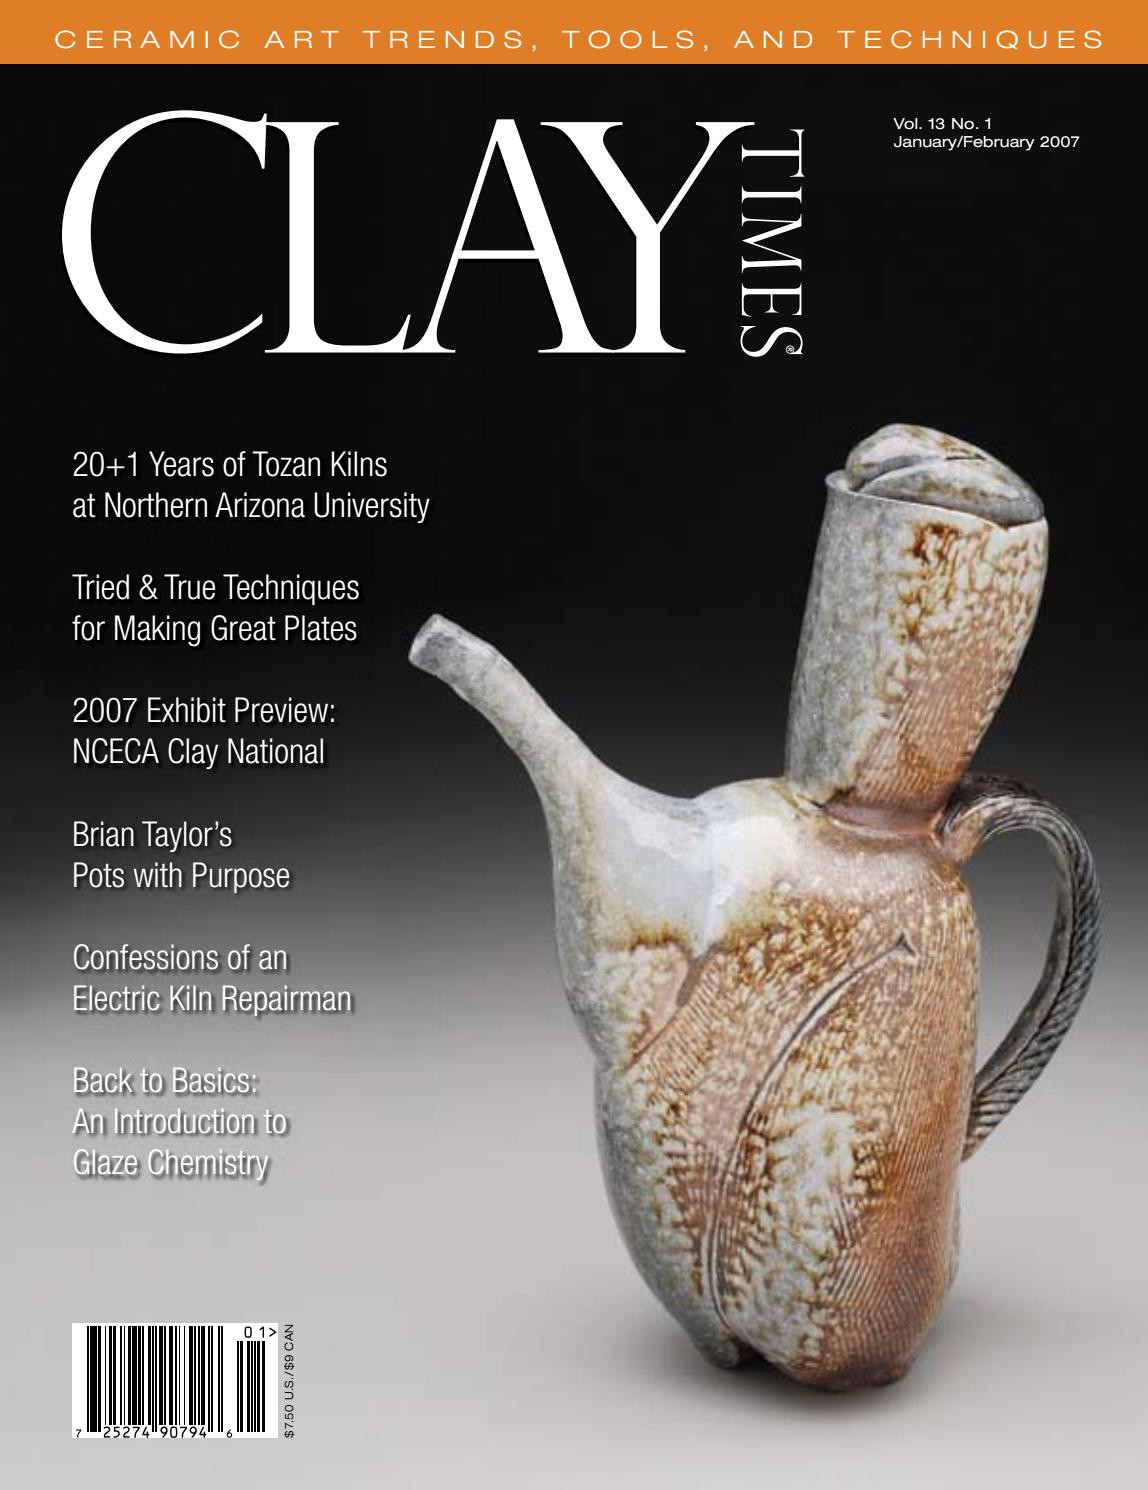 17 Elegant Waterford Crystal Vase 14 Inch 2024 free download waterford crystal vase 14 inch of clay times magazine volume 13 e280a2 issue 68 by claytimes issuu regarding page 1